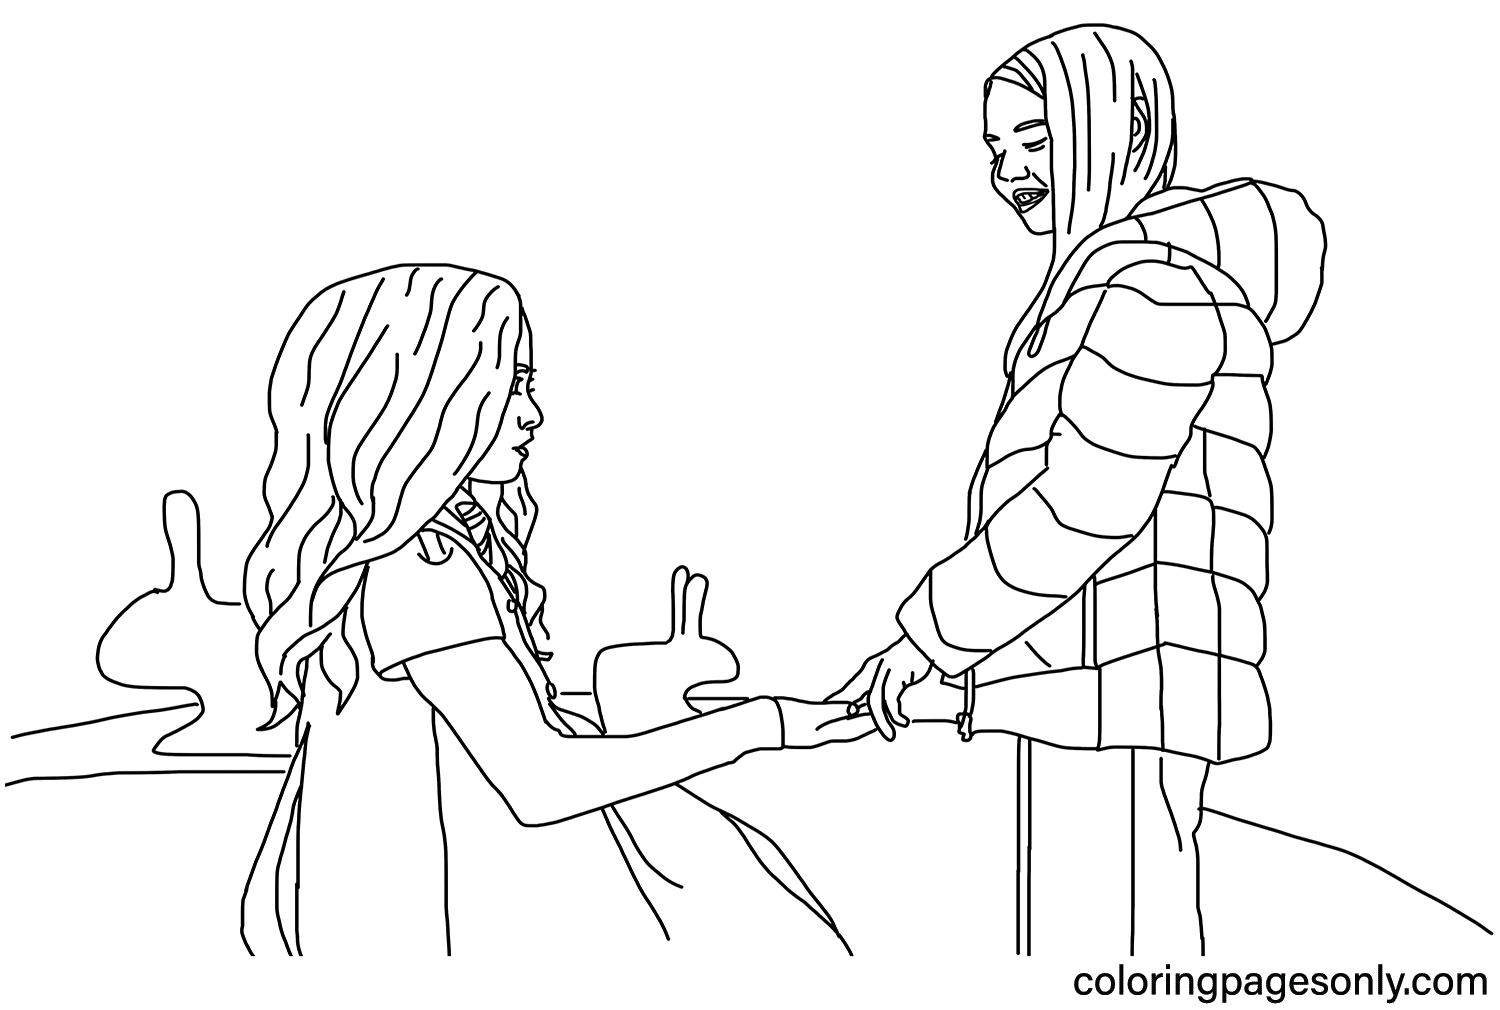 M3gan Movie Coloring Pages